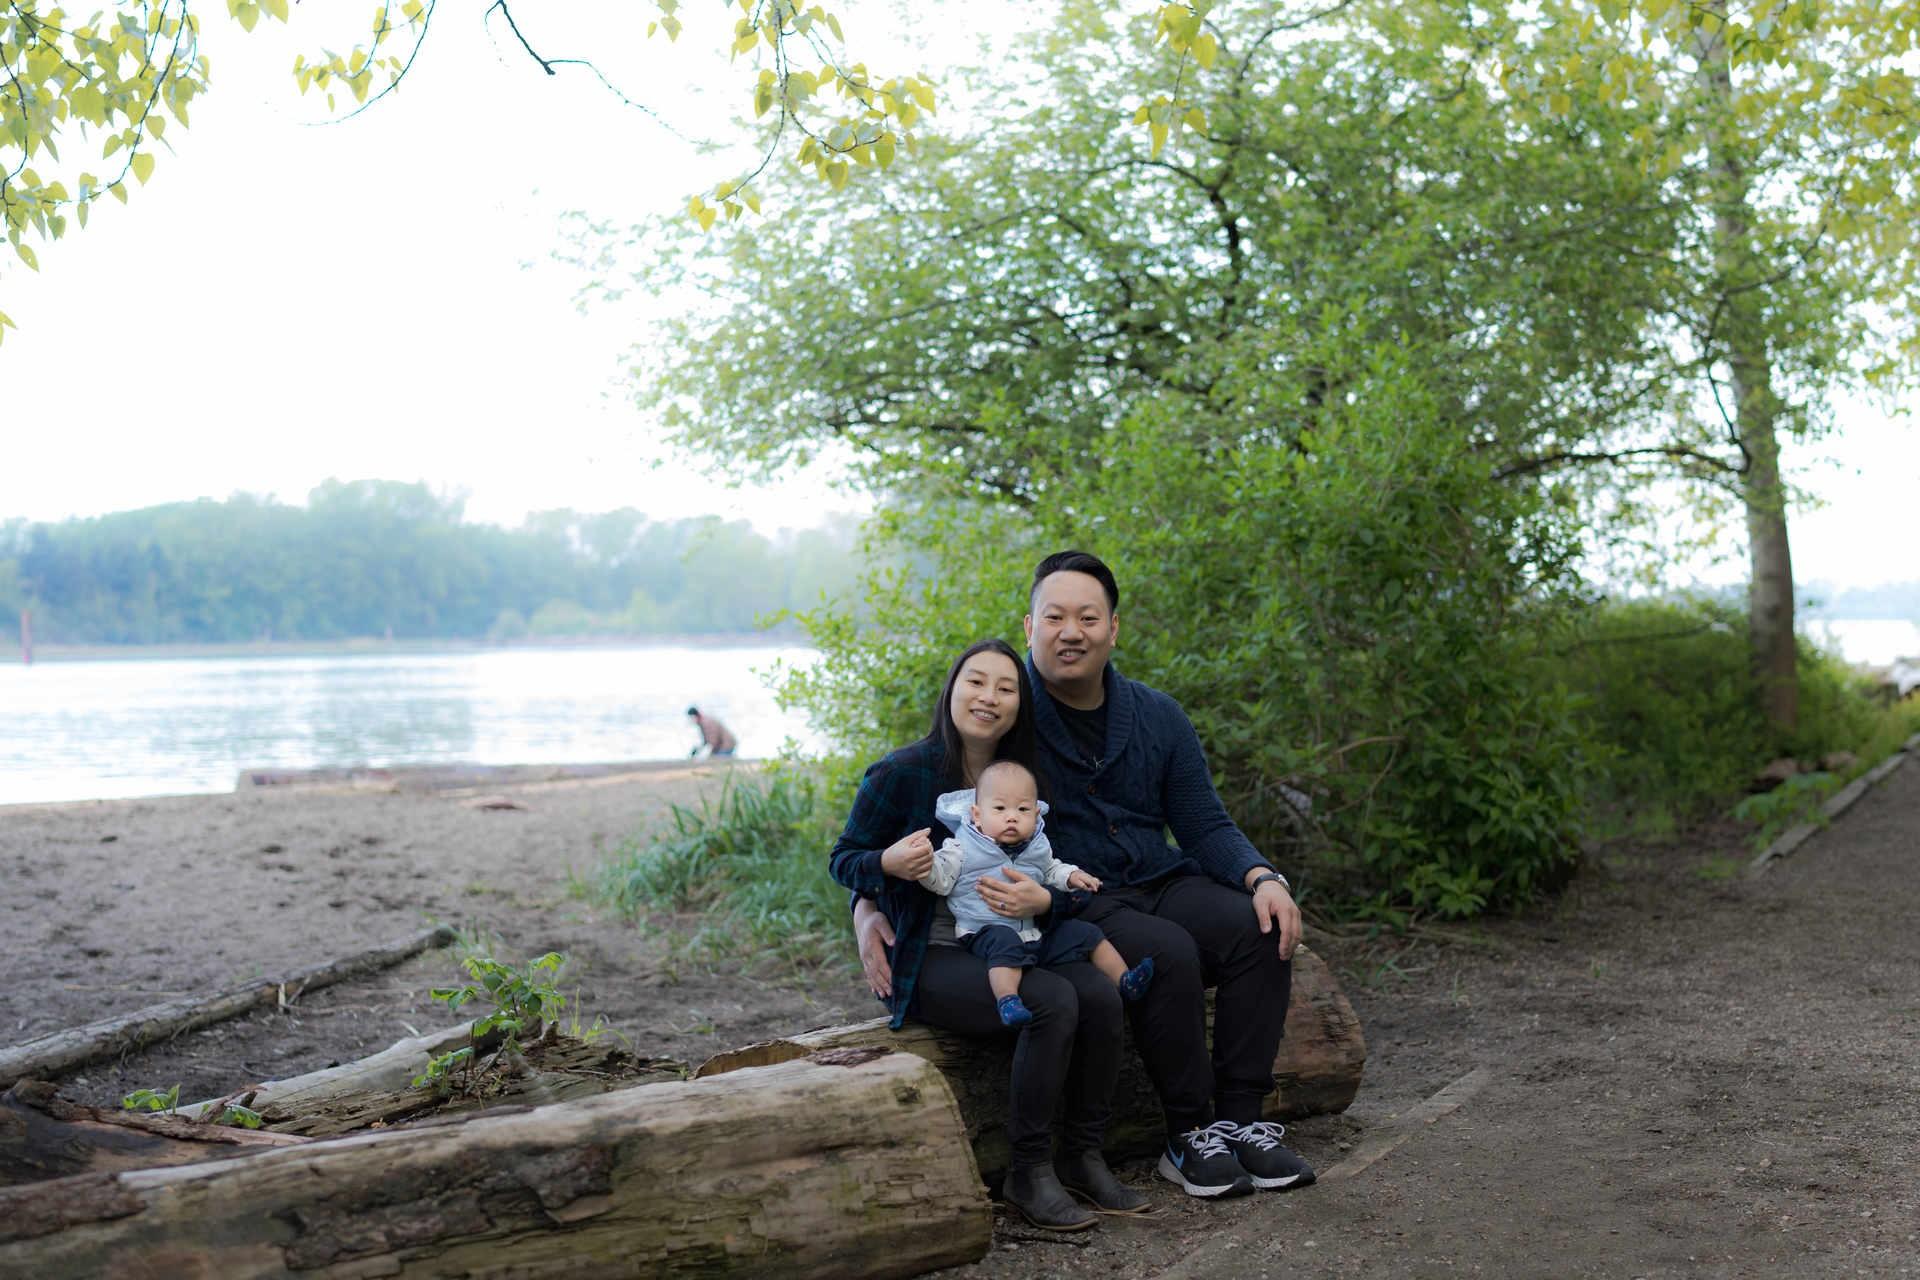 Vancouver Family Photoshoot at Fraser River Park with Lena & Kevin